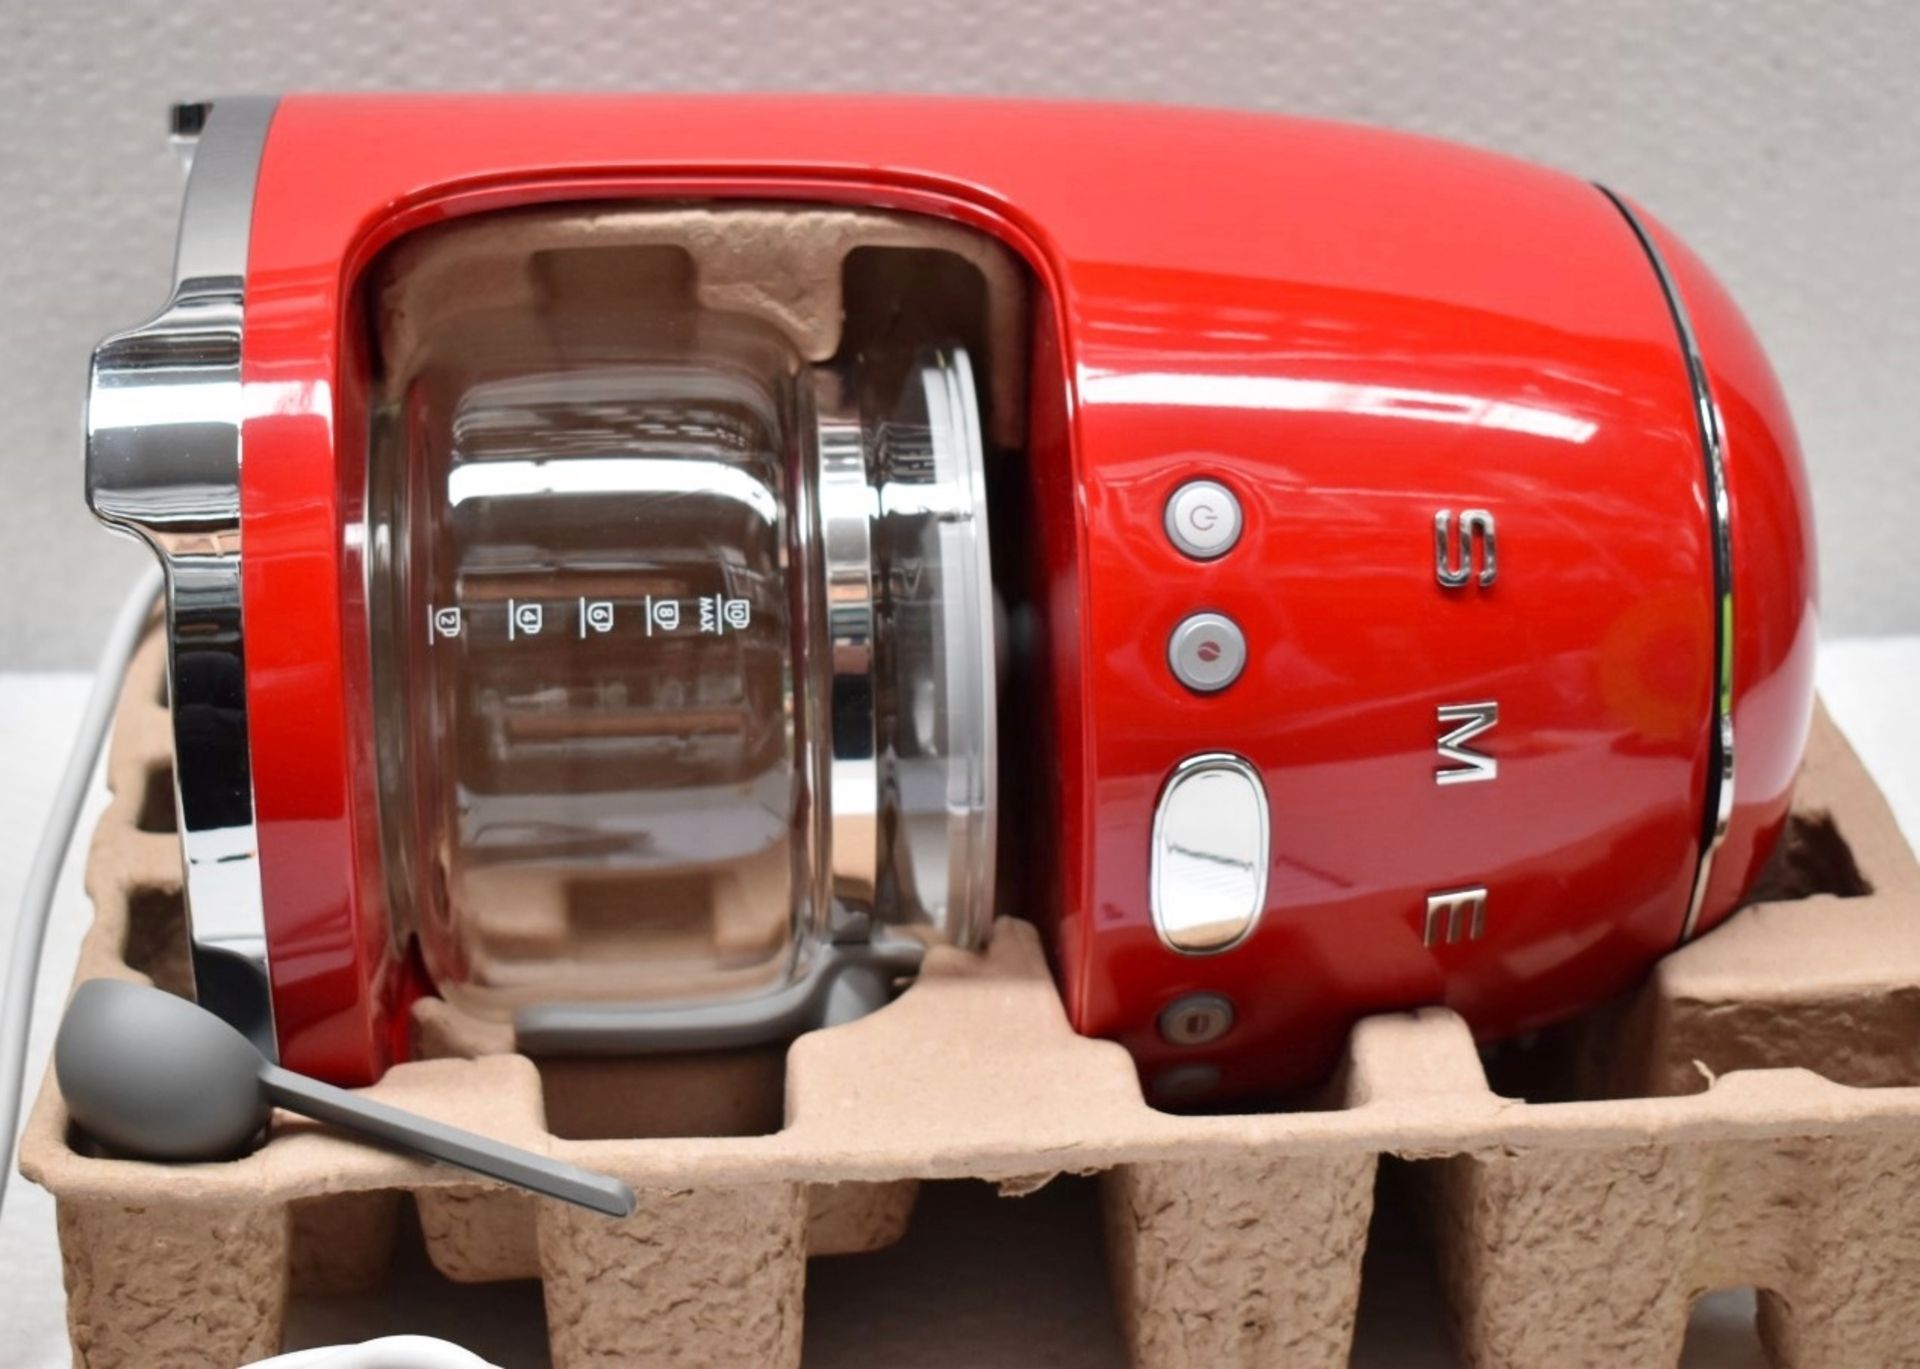 1 x SMEG Drip Retro-Style Filter Coffee Machine In Red, With Reuseable Filter And Digital - Image 10 of 15